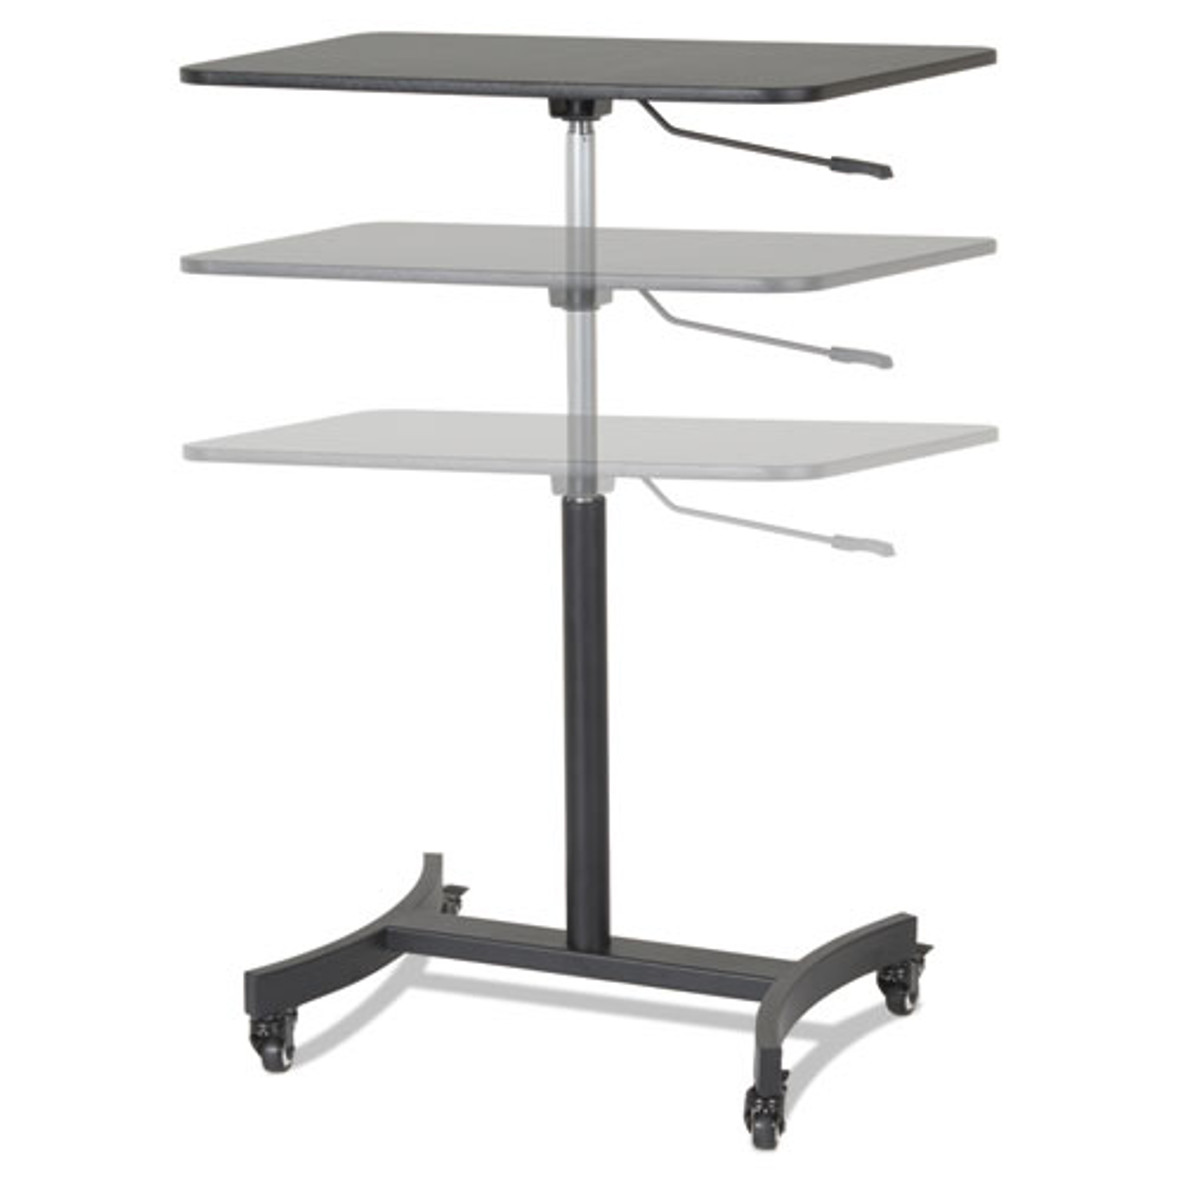 Victor® DC500 High Rise Collection Mobile Adjustable Standing Desk, 30.75" x 22" x 29" to 44", Black, 1 Each/Carton